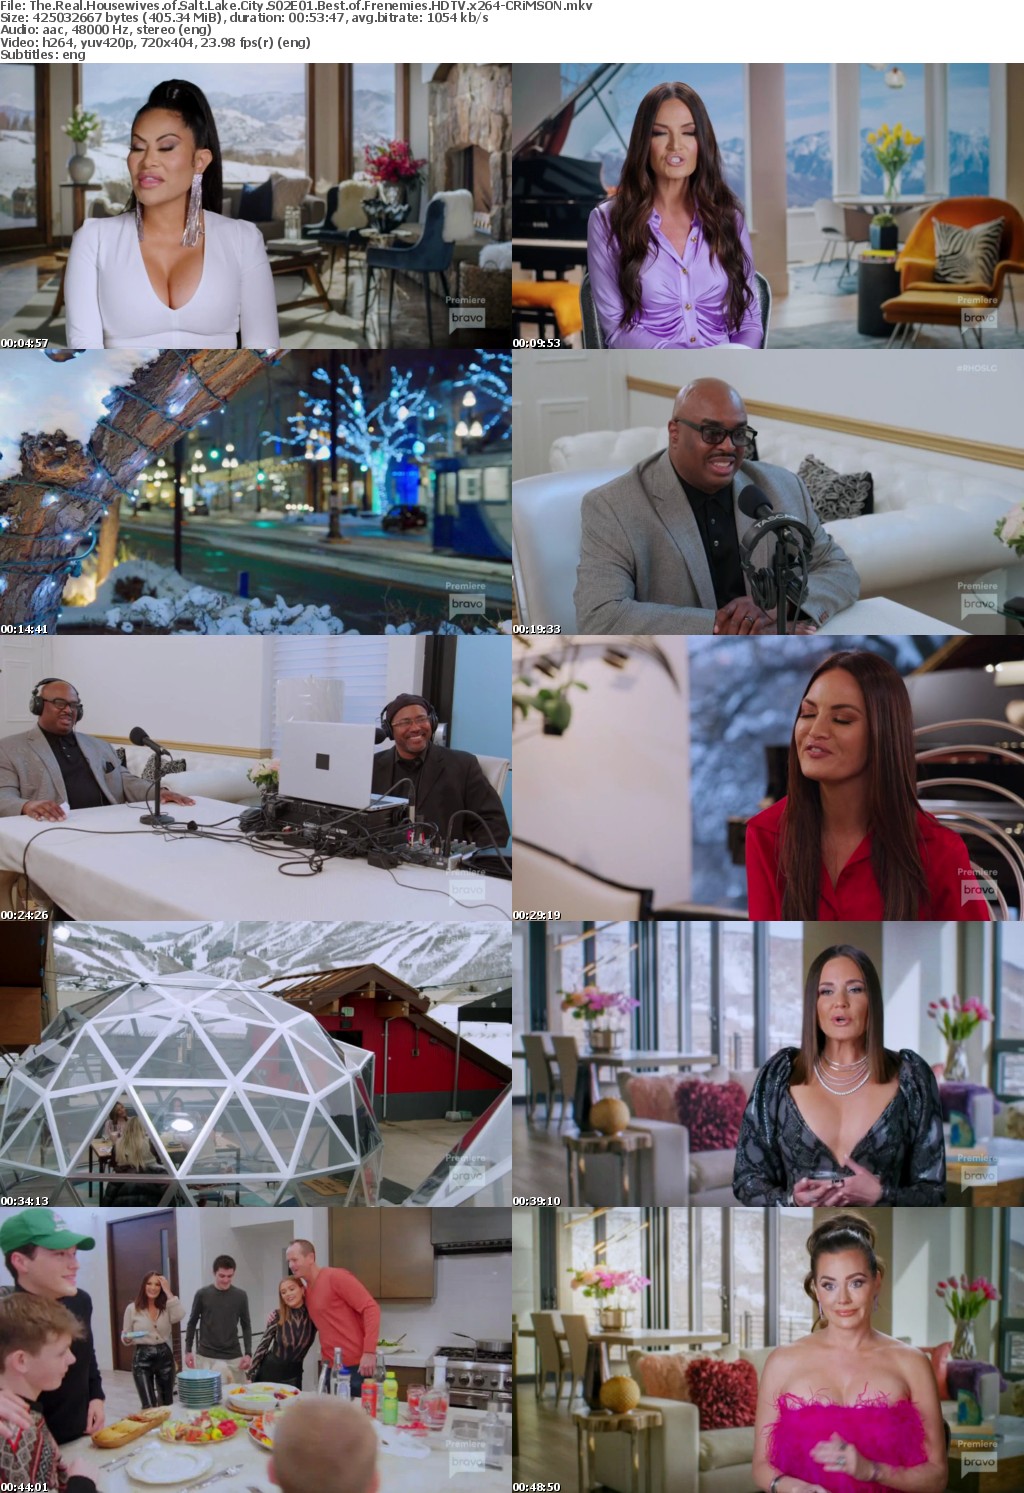 The Real Housewives of Salt Lake City S02E01 Best of Frenemies HDTV x264-CRiMSON